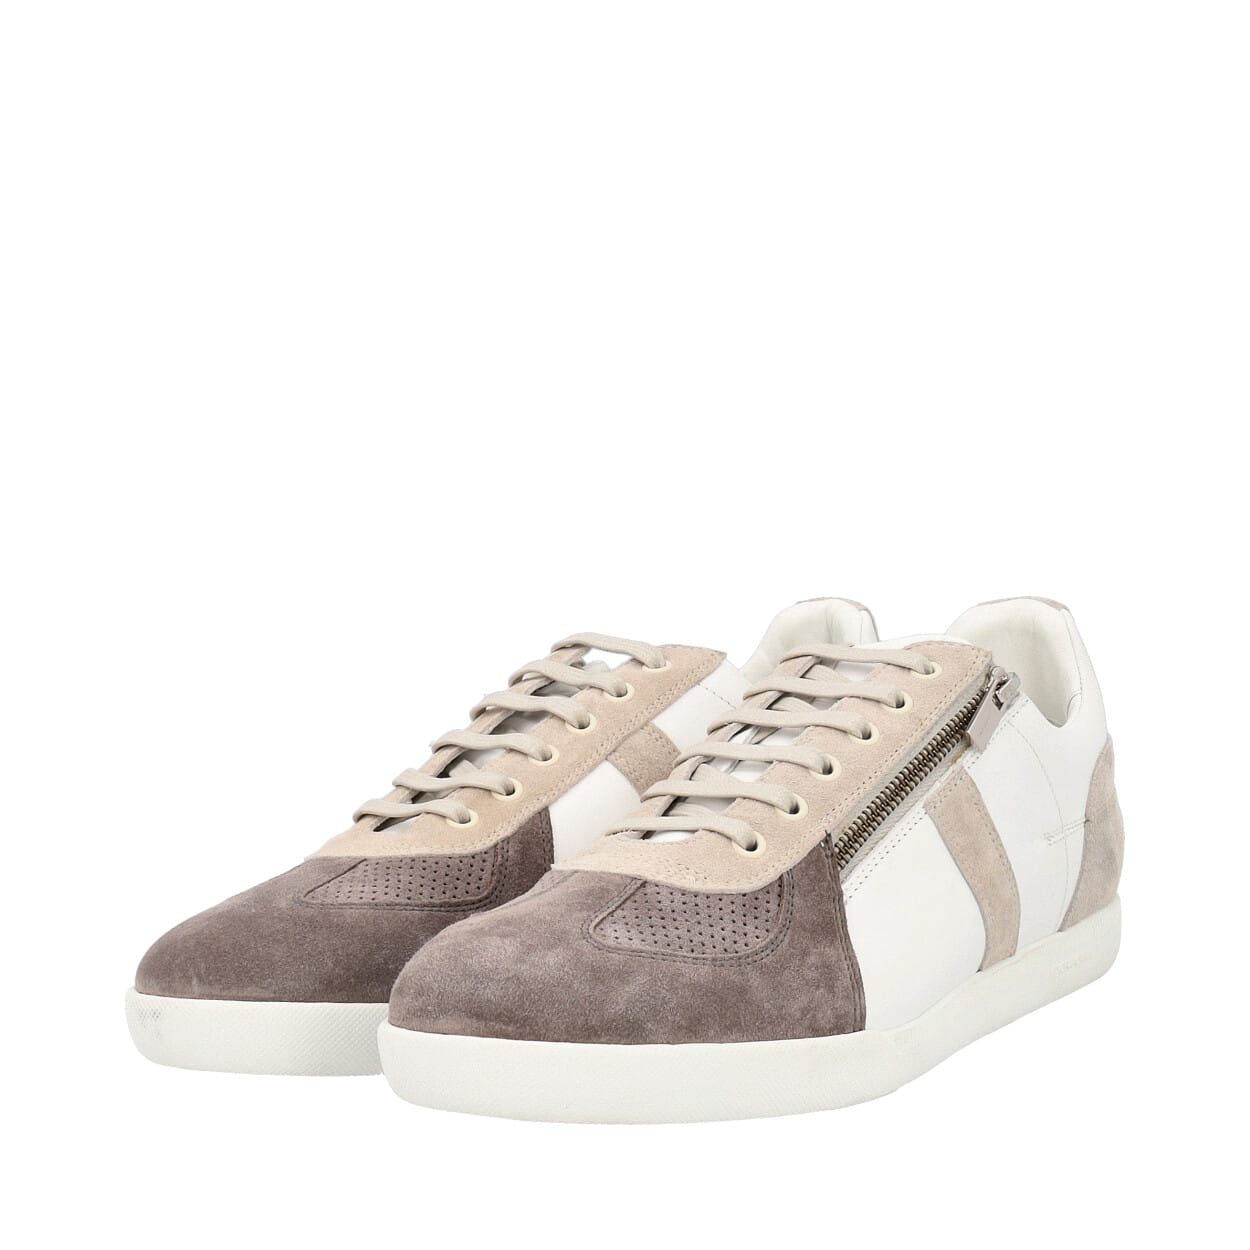 DIOR Homme Leather/Suede Sneakers Beige/White - NEW | Luxity